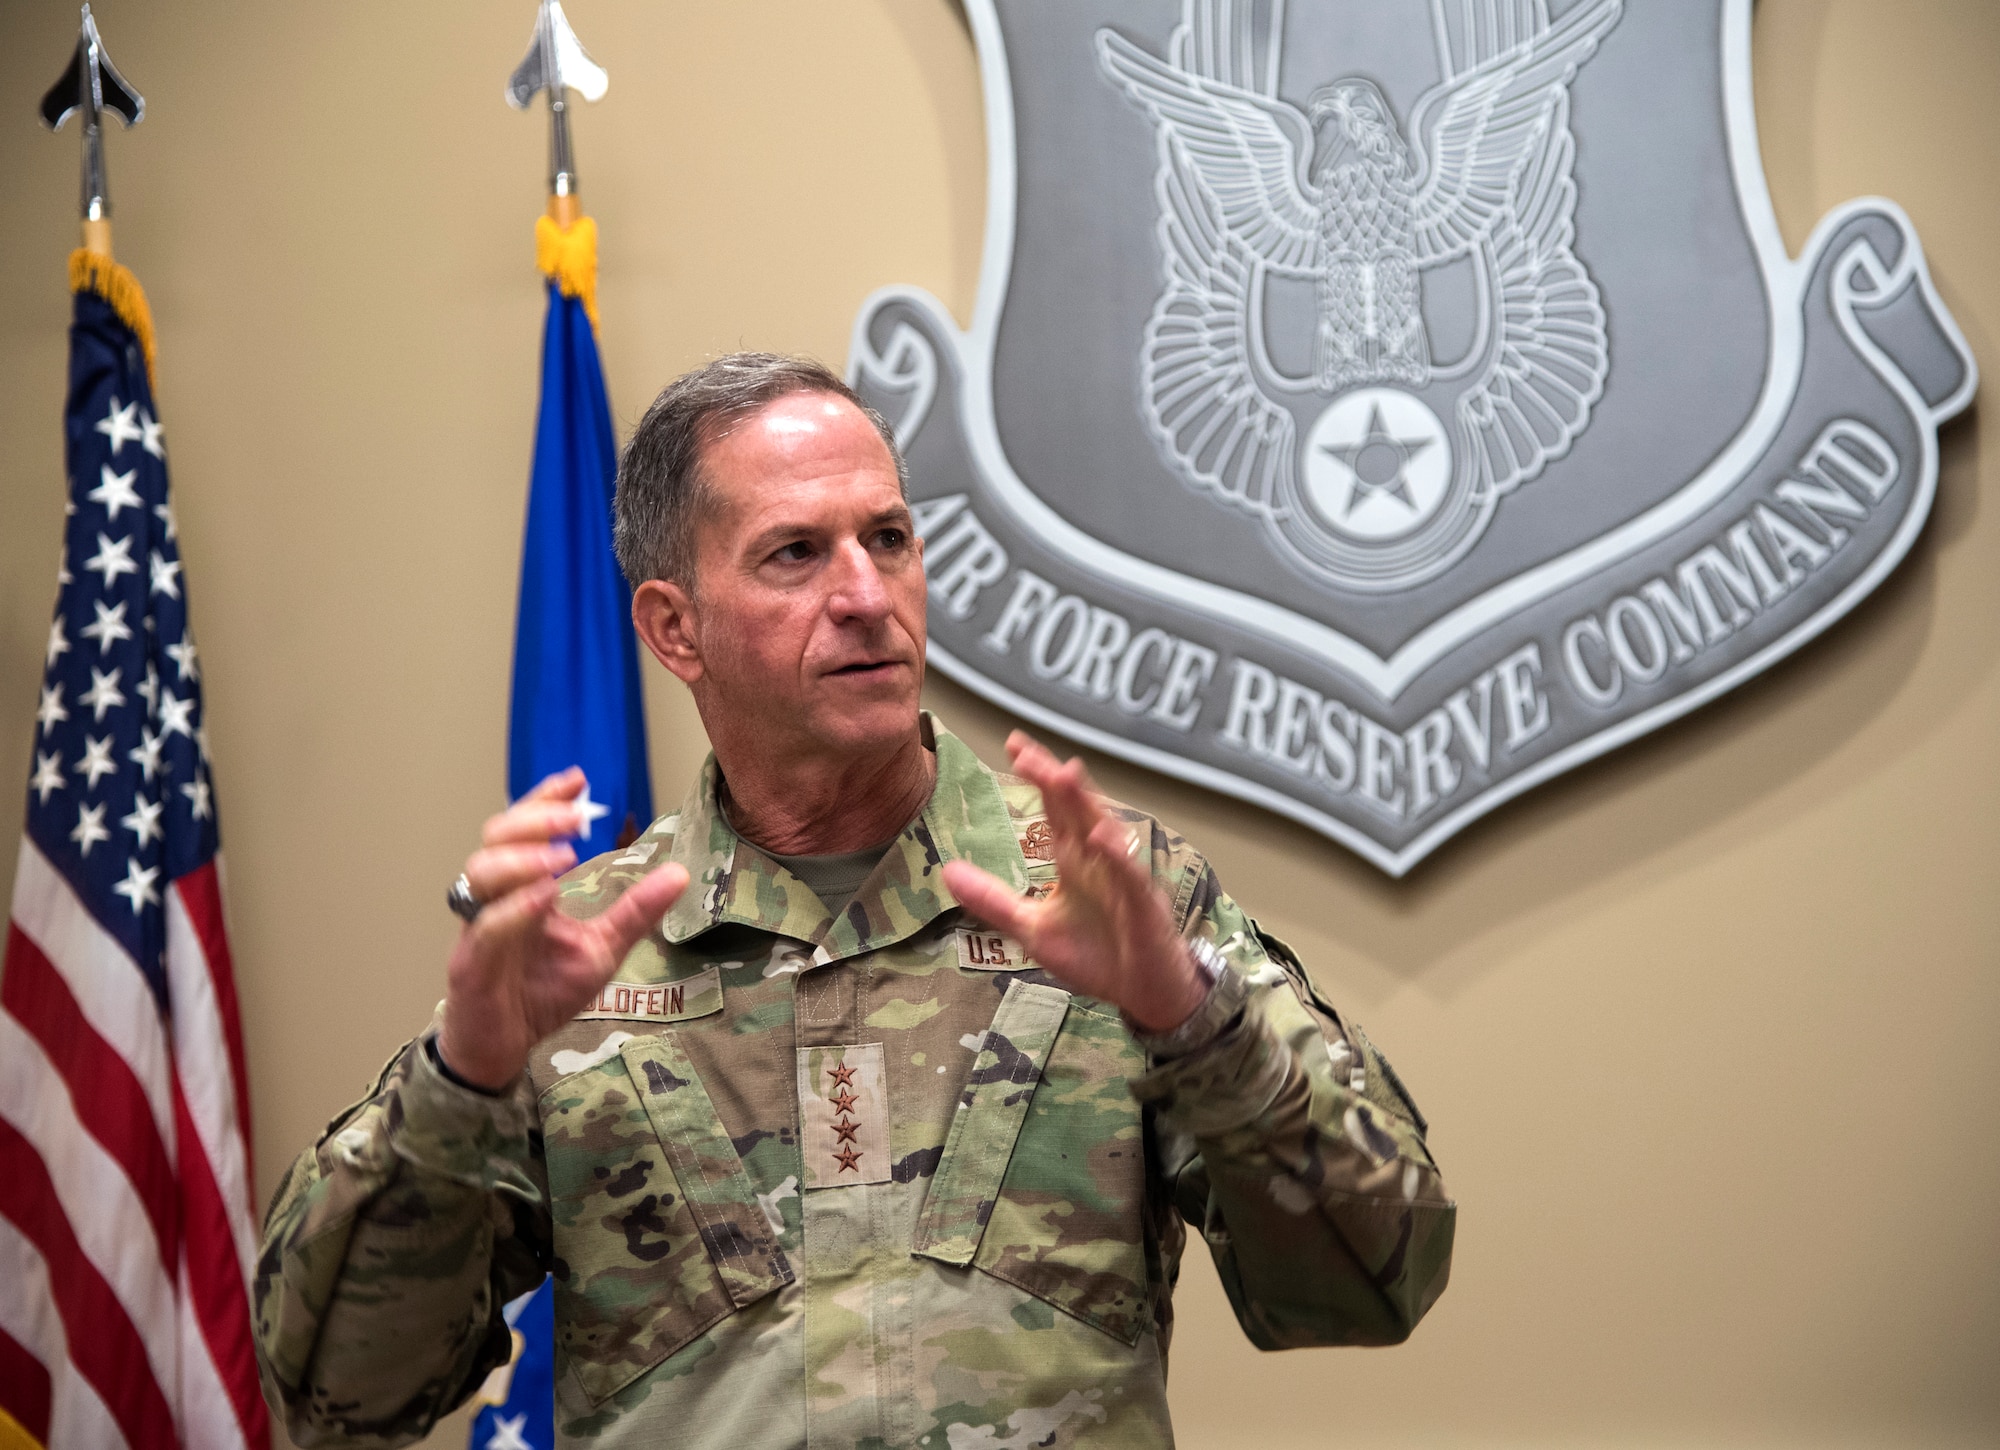 Photo of Air Force Chief of Staff Gen. David L. Goldfein speaking to members of Air Force Reserve Command during his visit to Robins Air Force Base, Georgia, June 24, 2020.